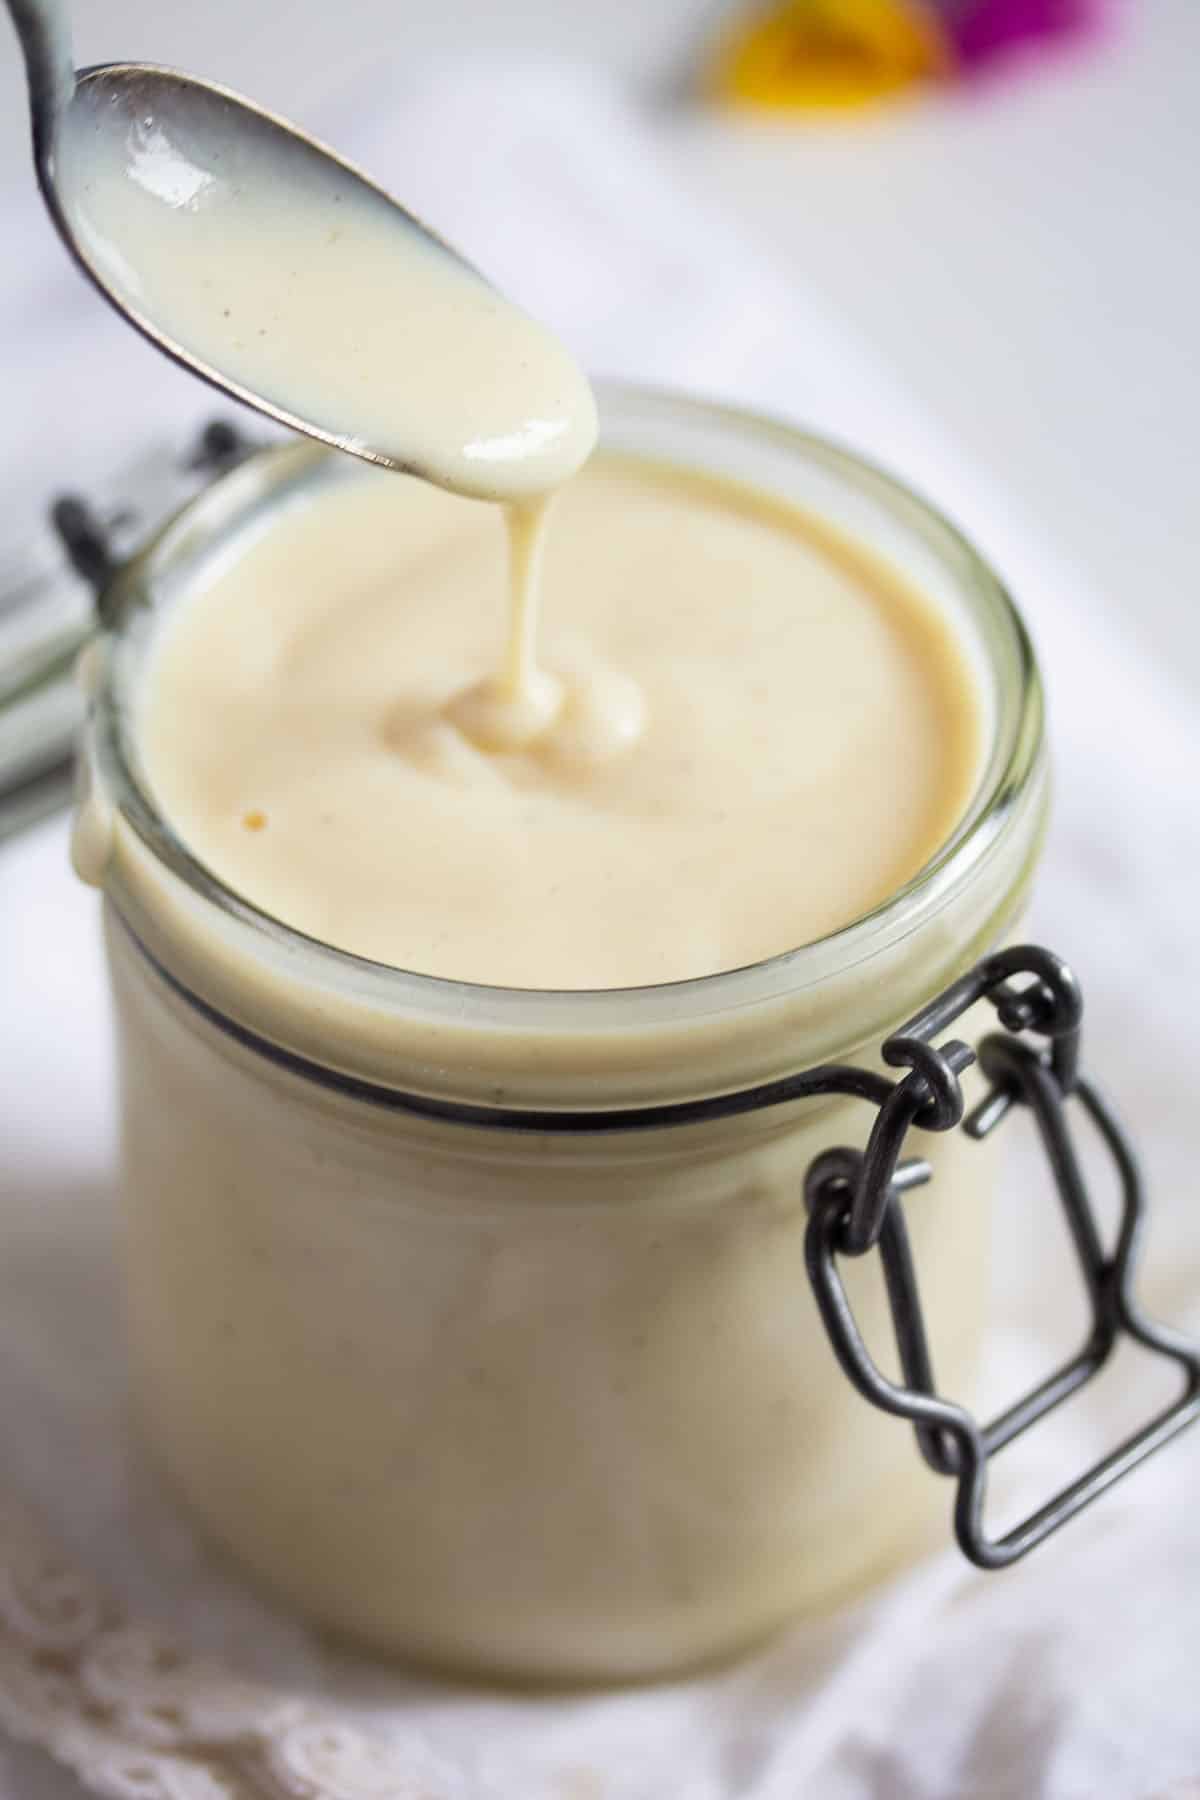 dripping vanilla sauce from a spoon back into a jar.